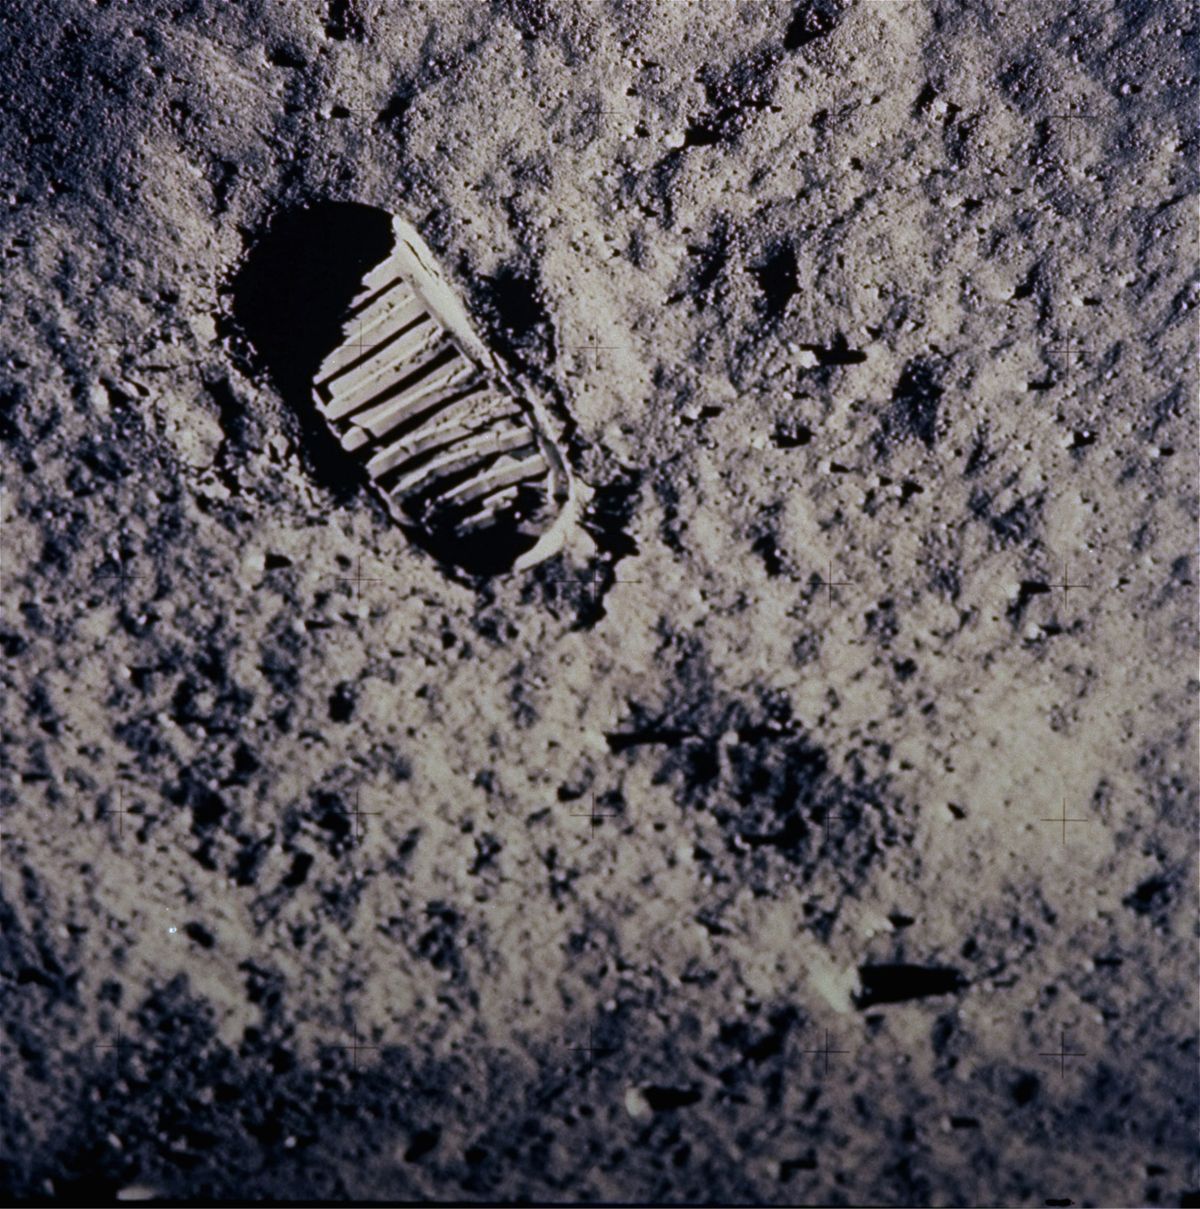 FILE - In this July 20, 1969 file photo, a footprint left by one of the astronauts of the Apollo 11 mission shows in the soft, powder surface of the moon. Commander Neil A. Armstrong and Air Force Col. Edwin E. "Buzz" Aldrin Jr. became the first men to walk on the moon after blastoff from Cape Kennedy, Fla., on July 16, 1969.  The family of Neil Armstrong, the first man to walk on the moon, says he died Saturday, Aug. 25, 2012, at age 82. A statement from the family says he died following complications resulting from cardiovascular procedures. It doesn